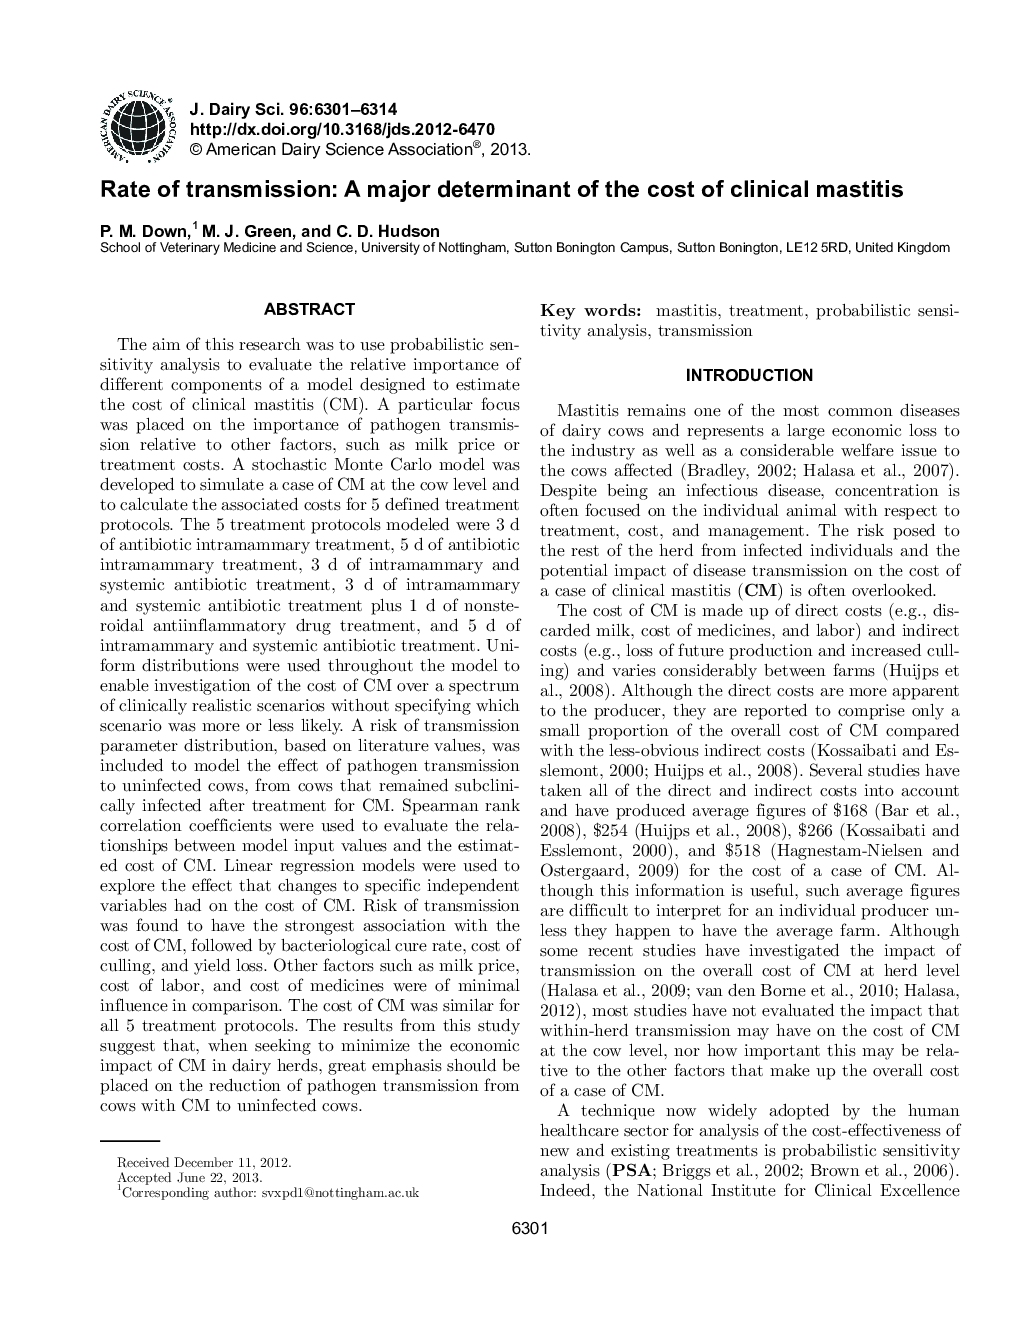 Rate of transmission: A major determinant of the cost of clinical mastitis